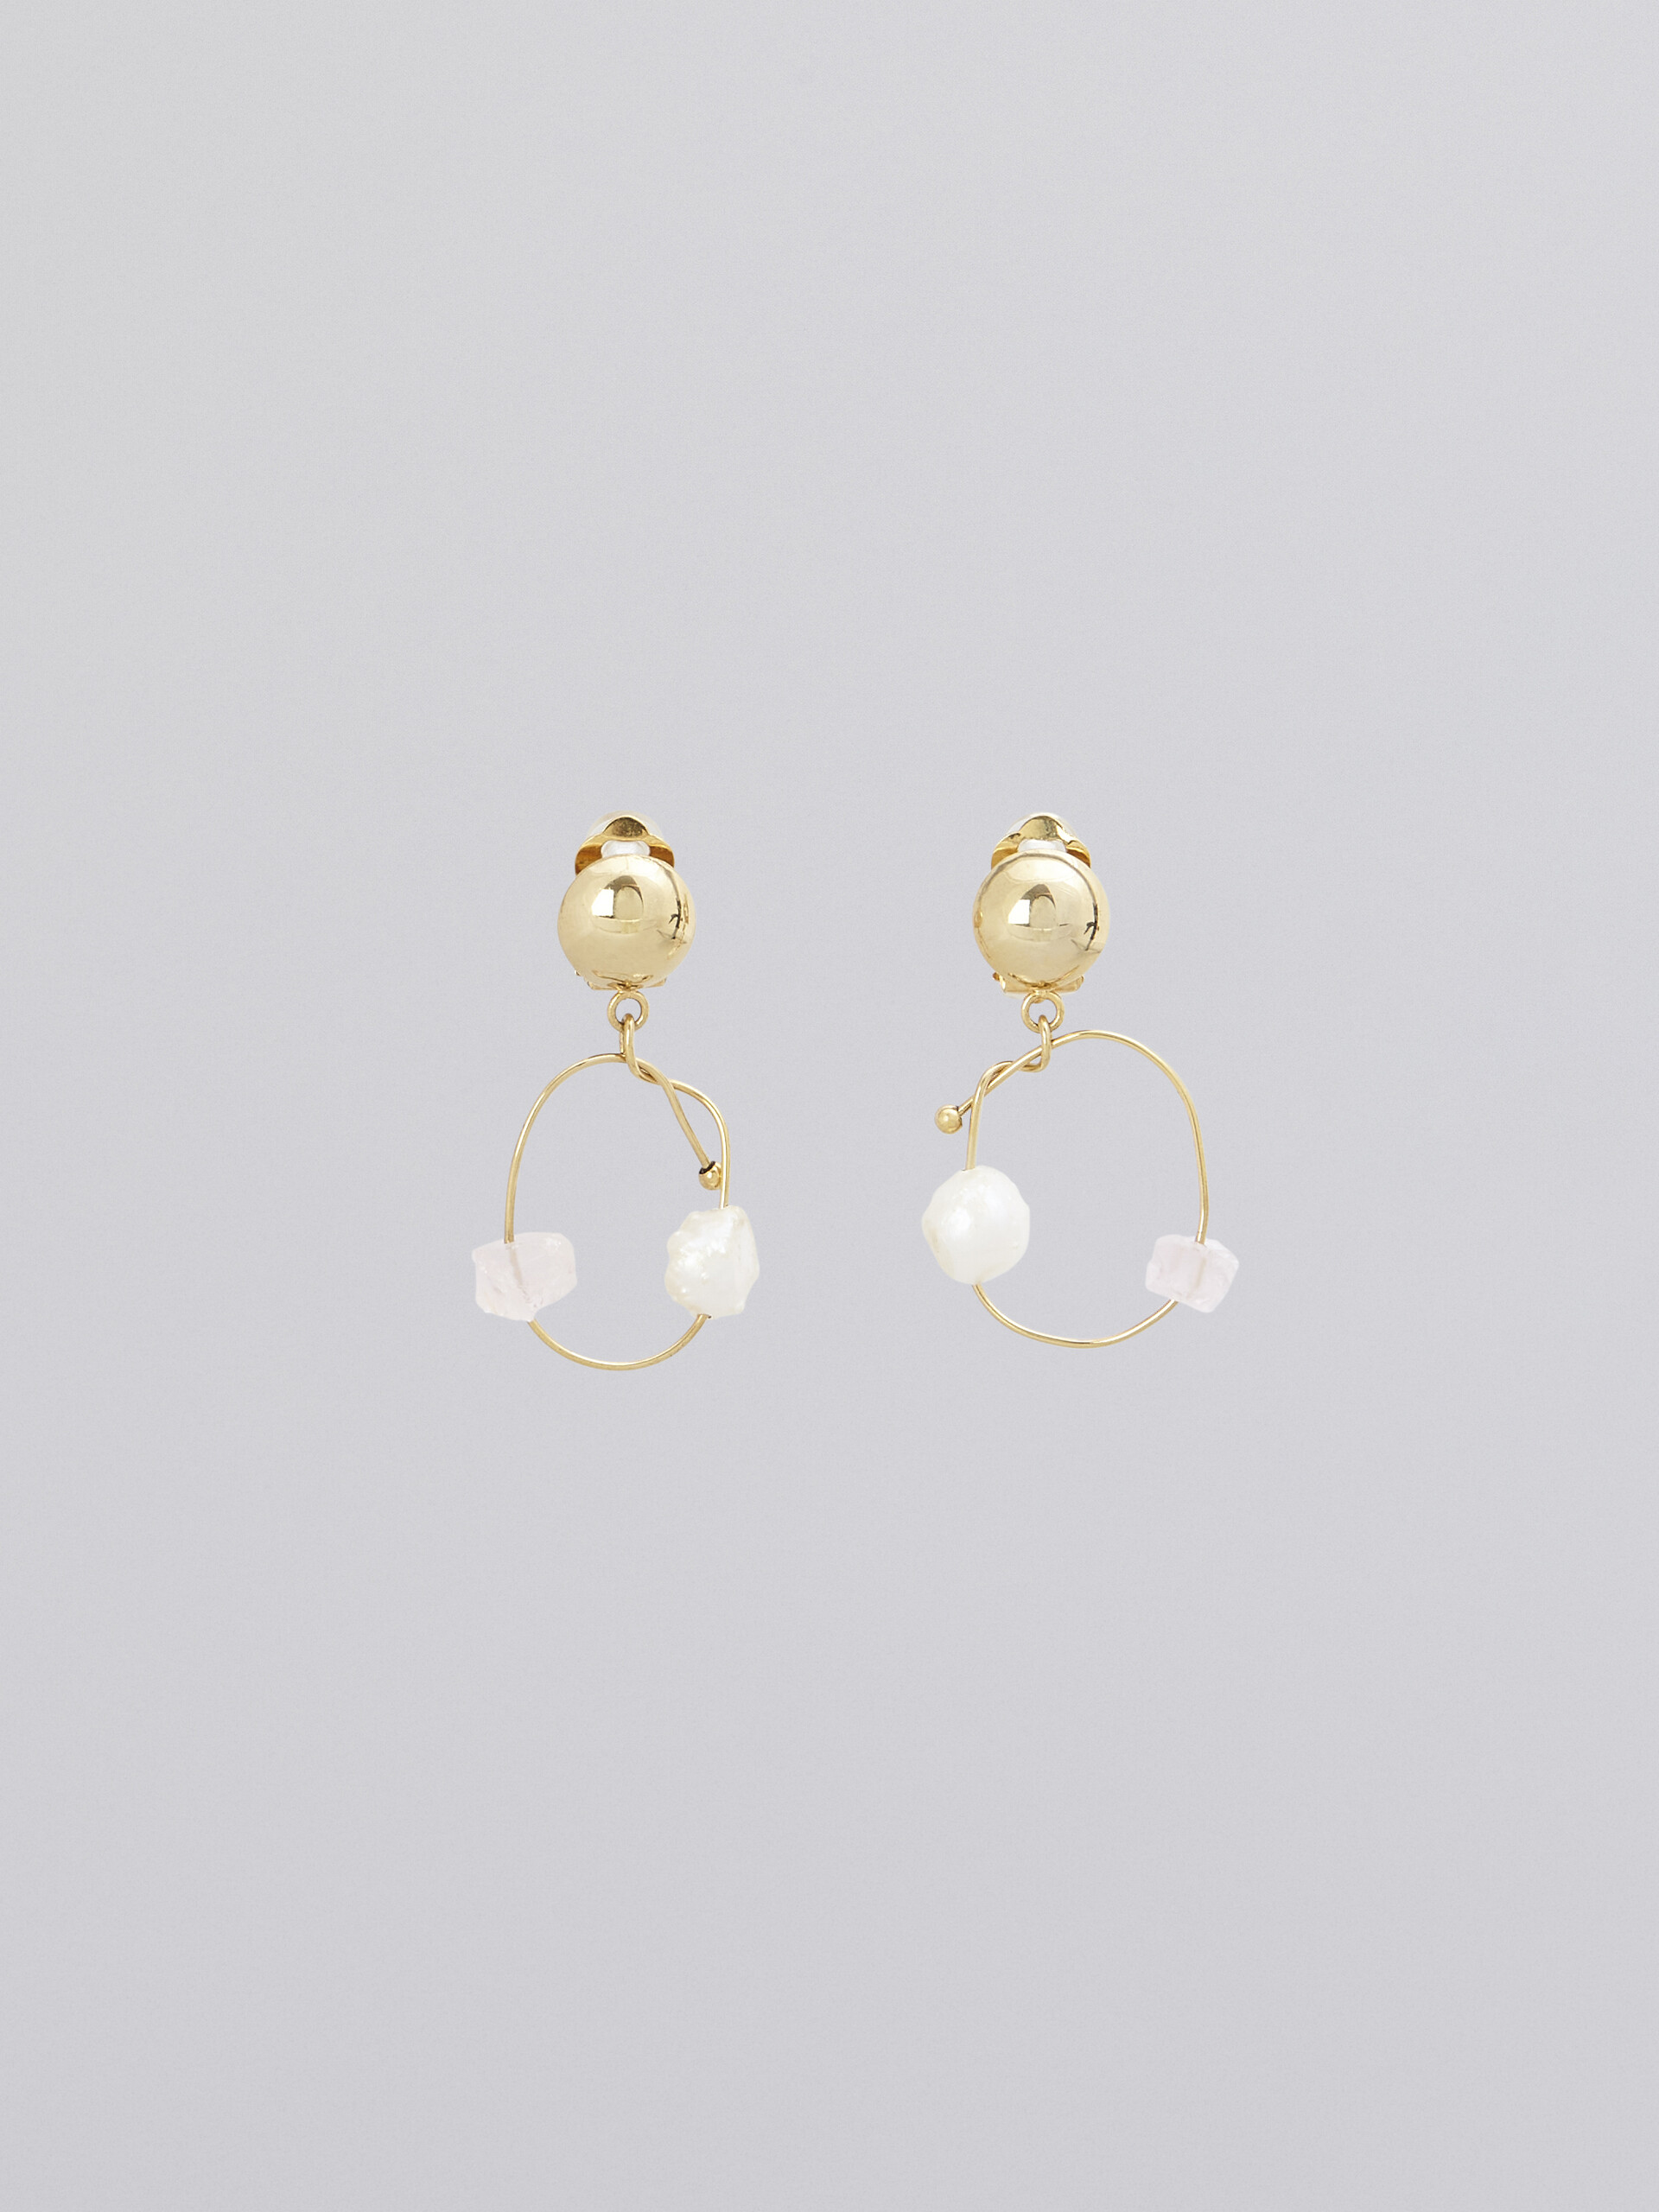 Brass TEARS earrings with glass and quartz beads - Earrings - Image 1